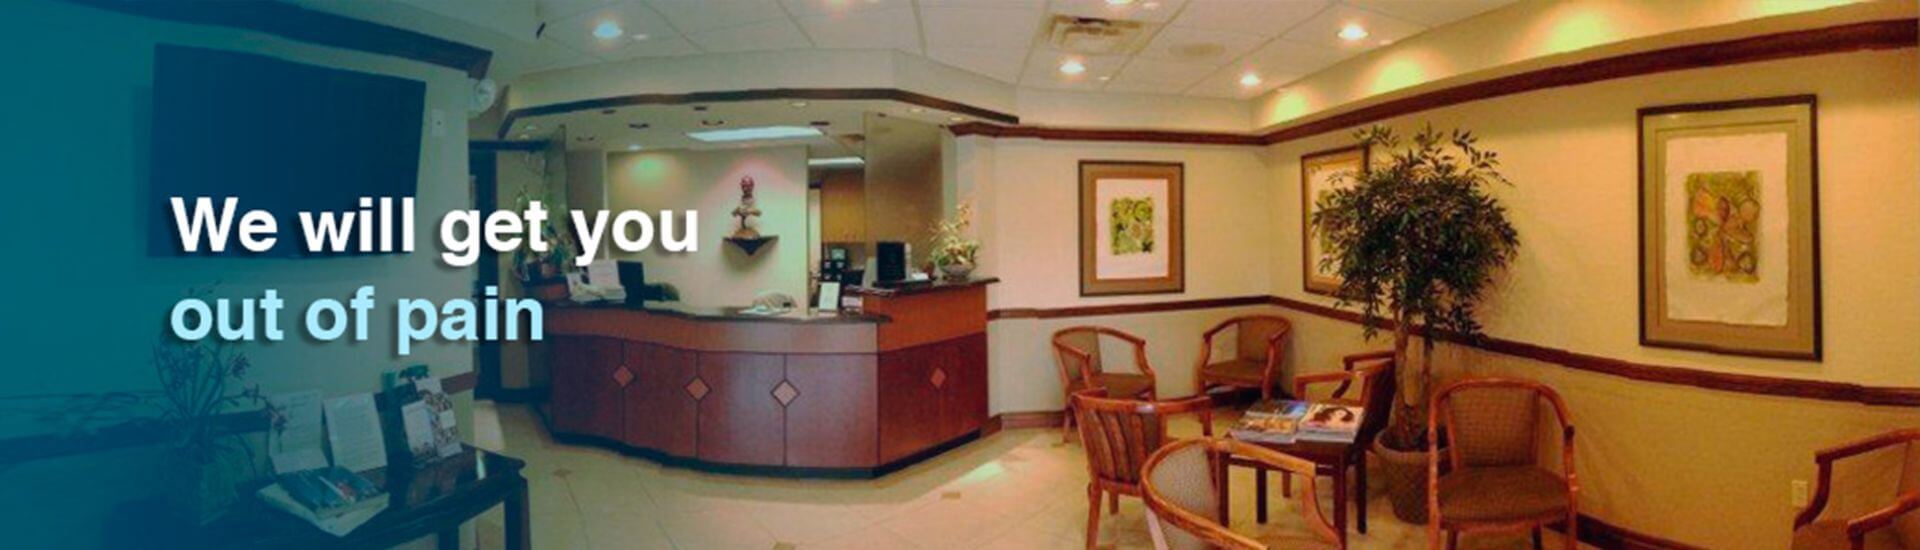 Oral and Facial Surgeon in Weston - banner third